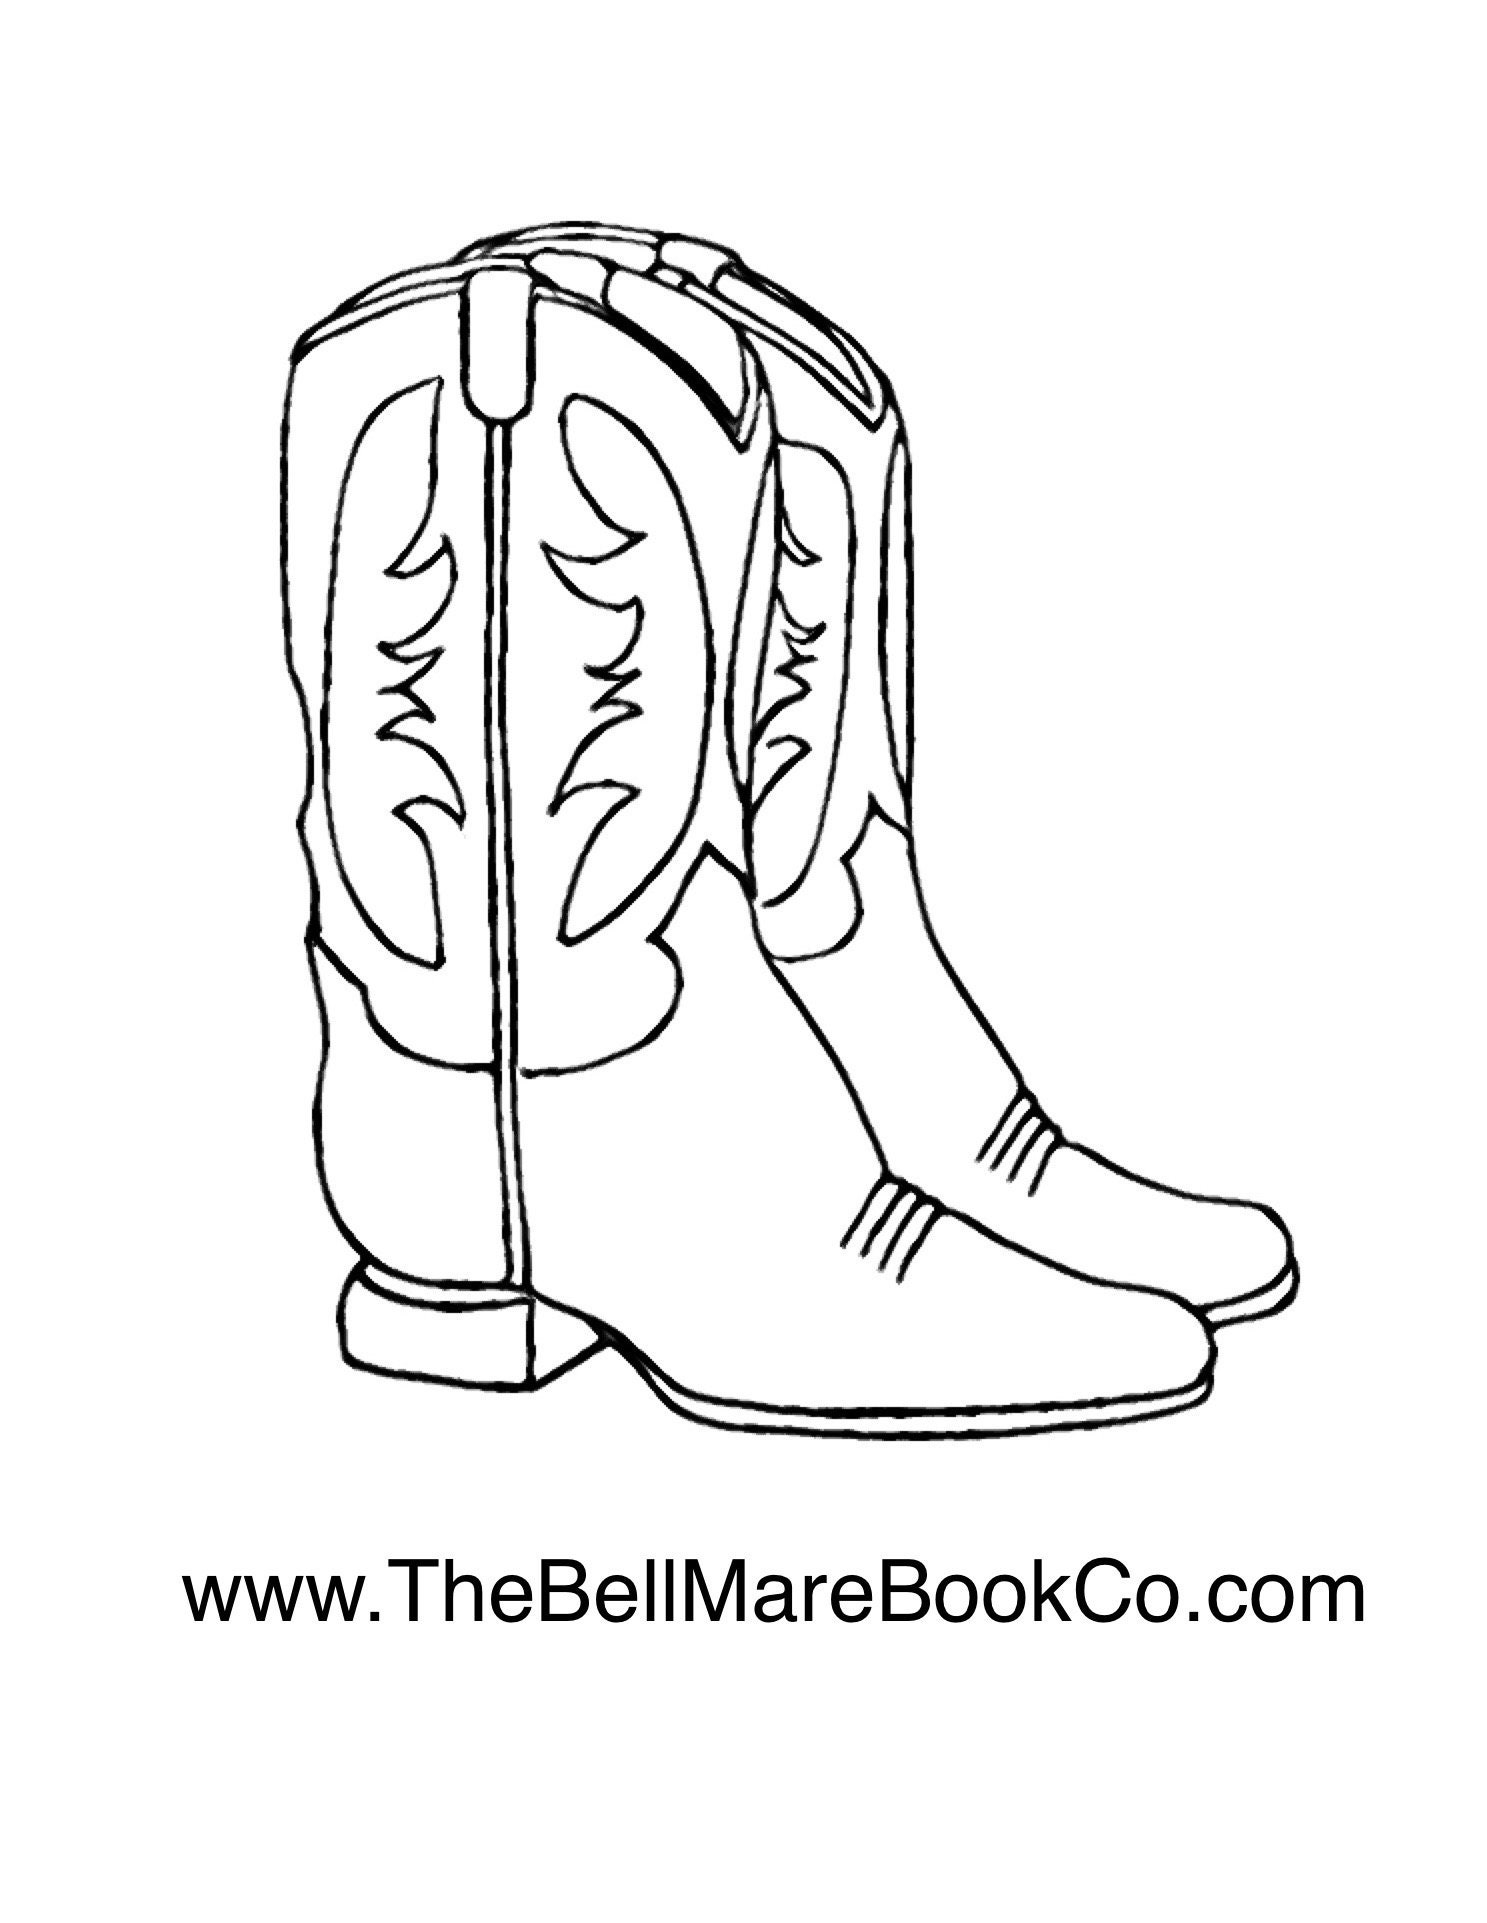 Rodeo cowboy boots coloring page